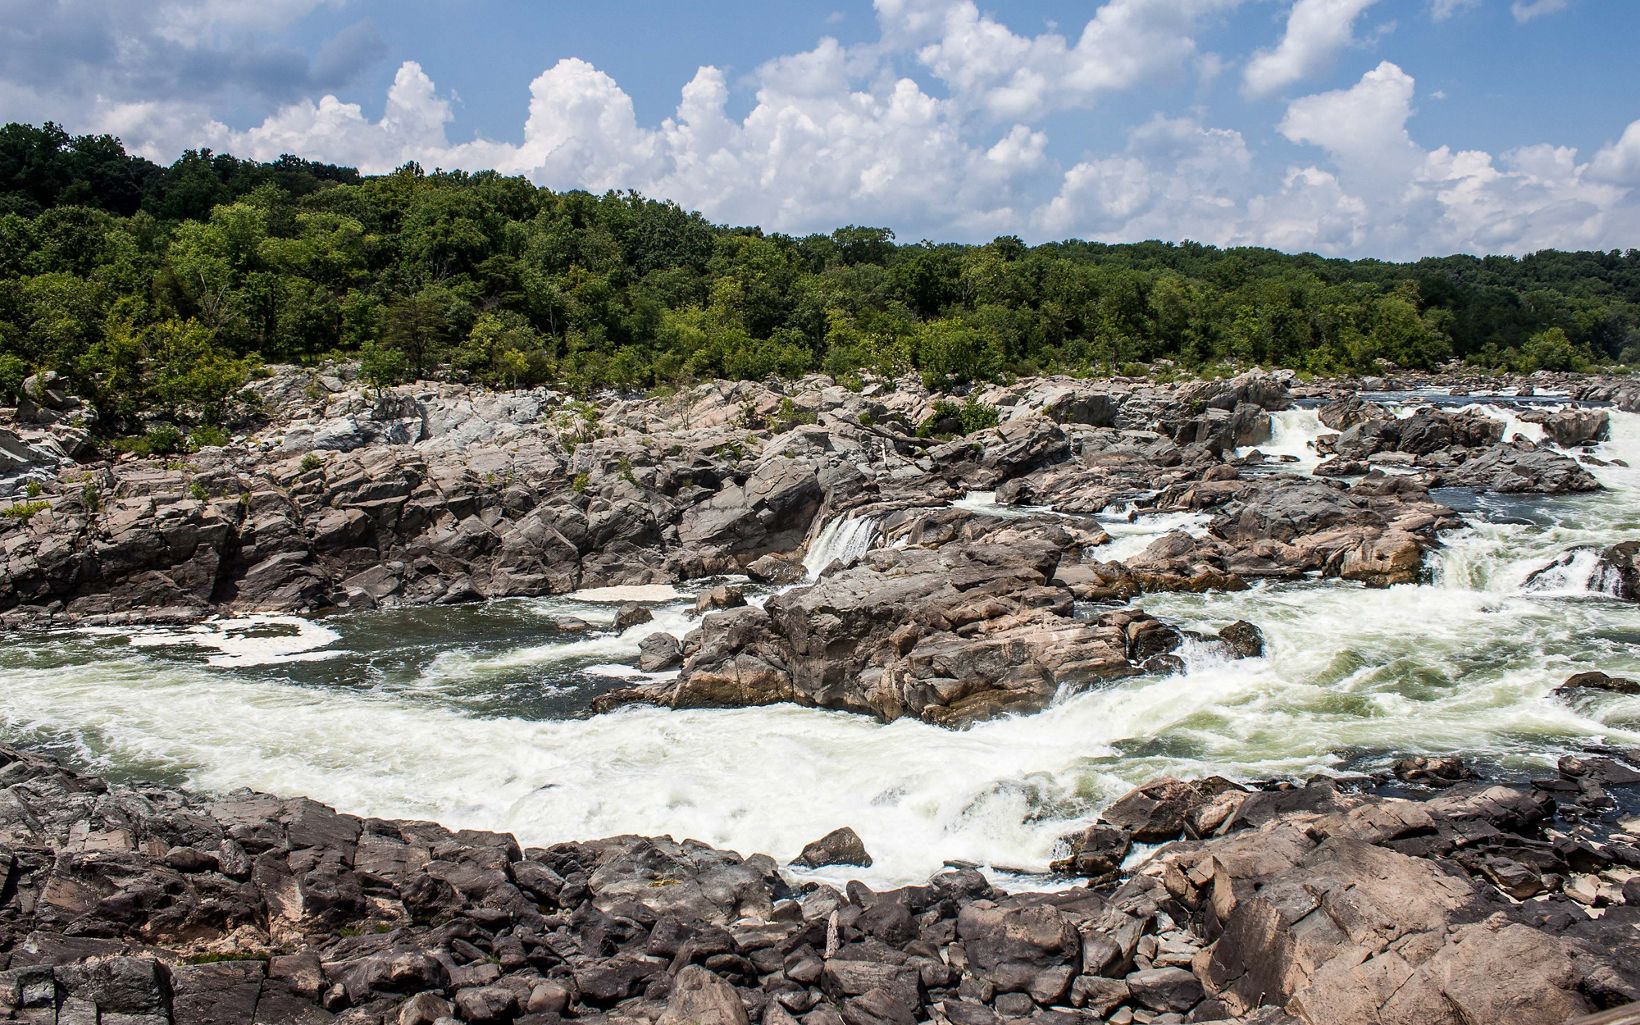 White water rushes over large rocks to create a series of short falls on the Potomac River. The river bank is thickly lined with trees.